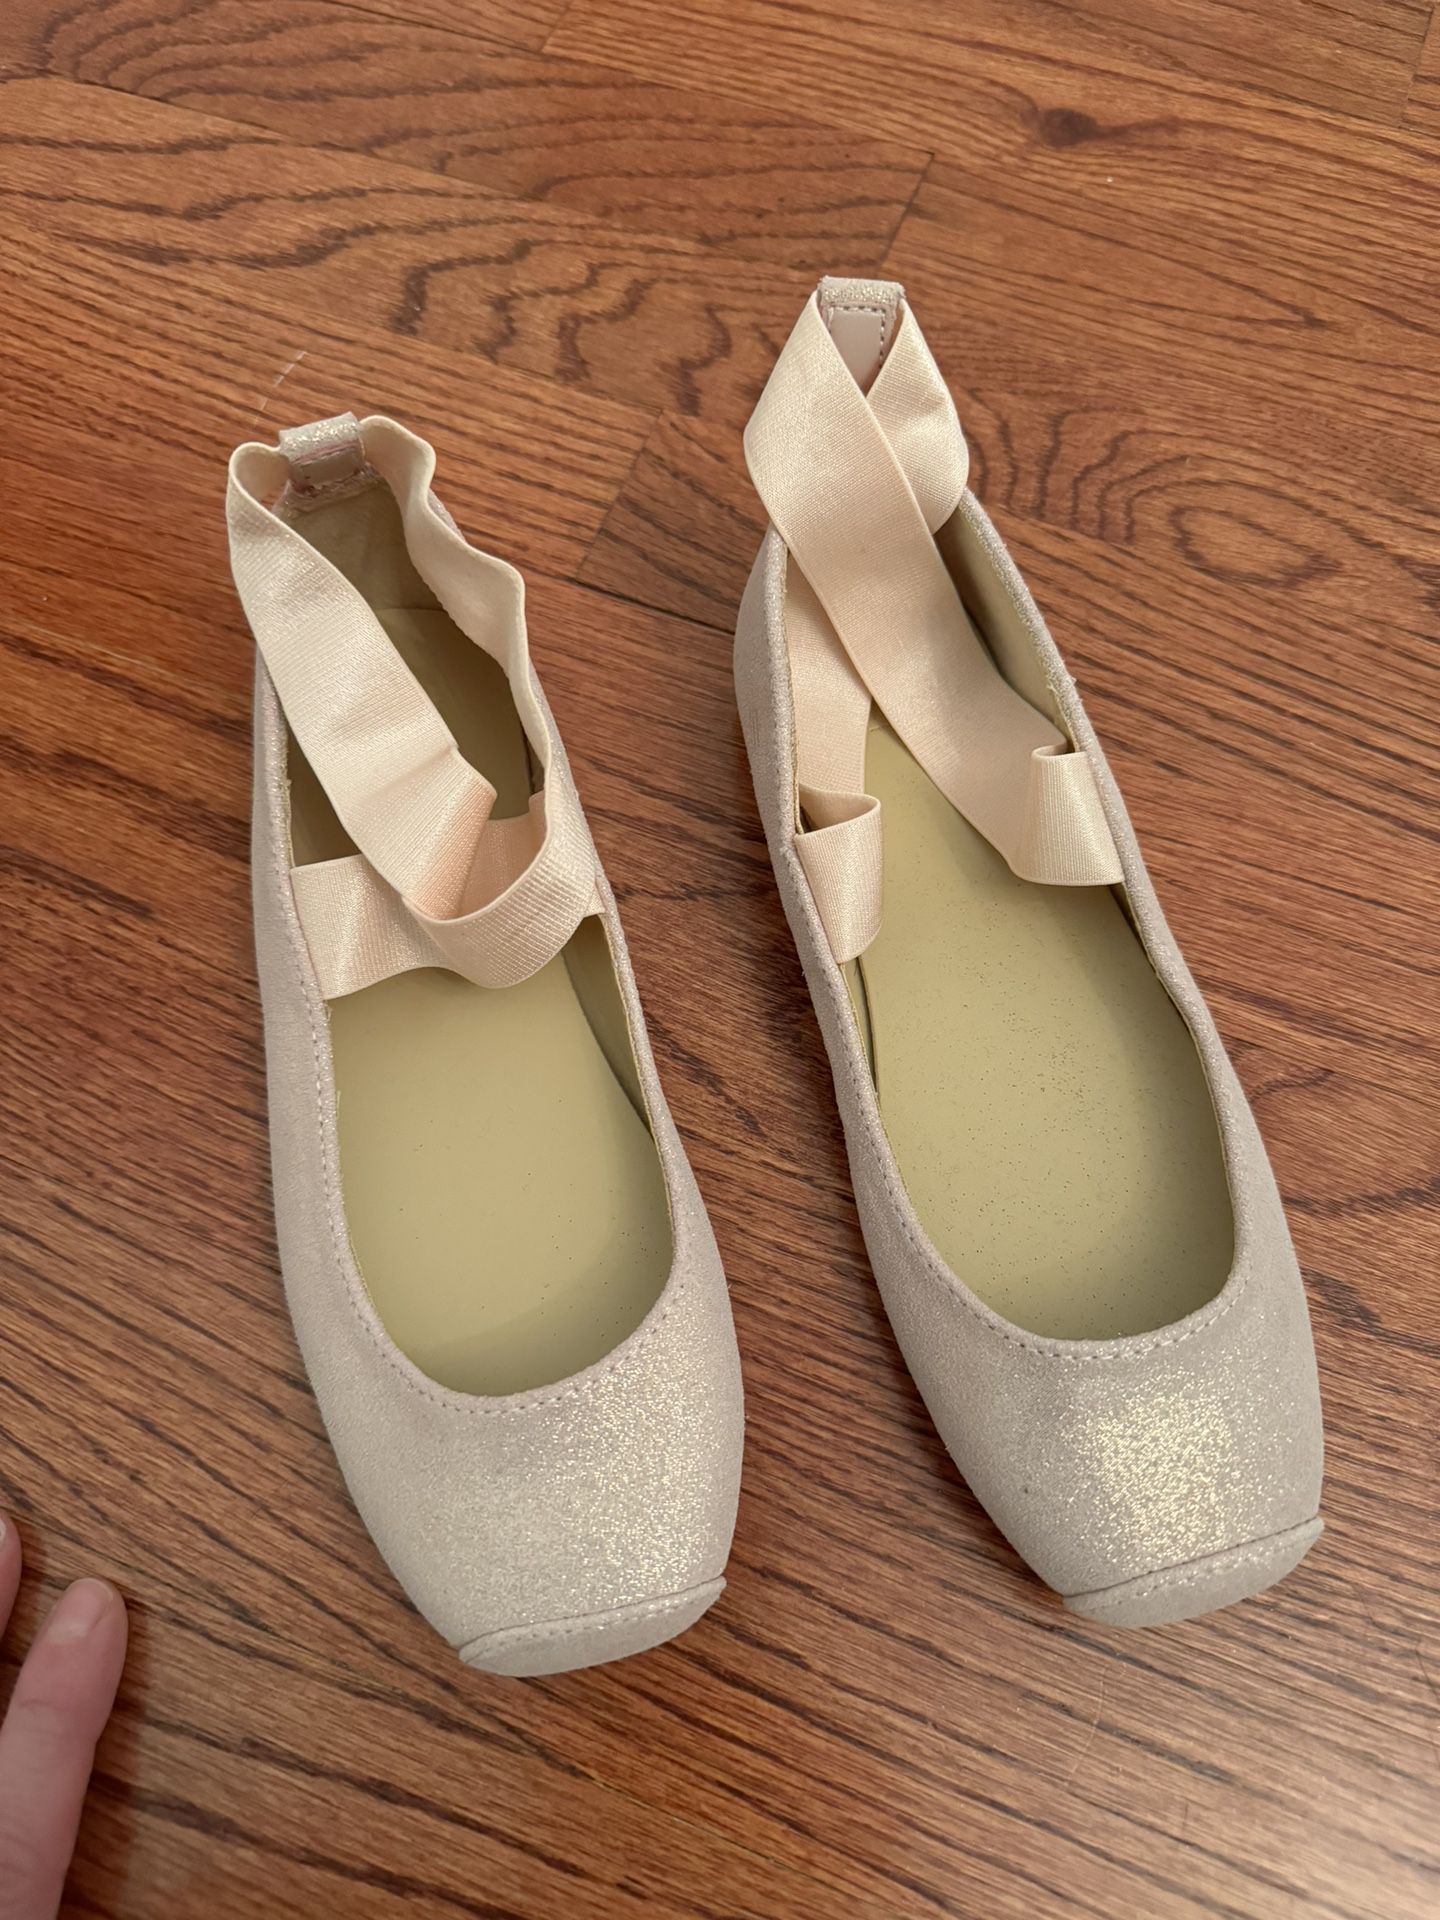 Janie And Jack Ballet Shoes